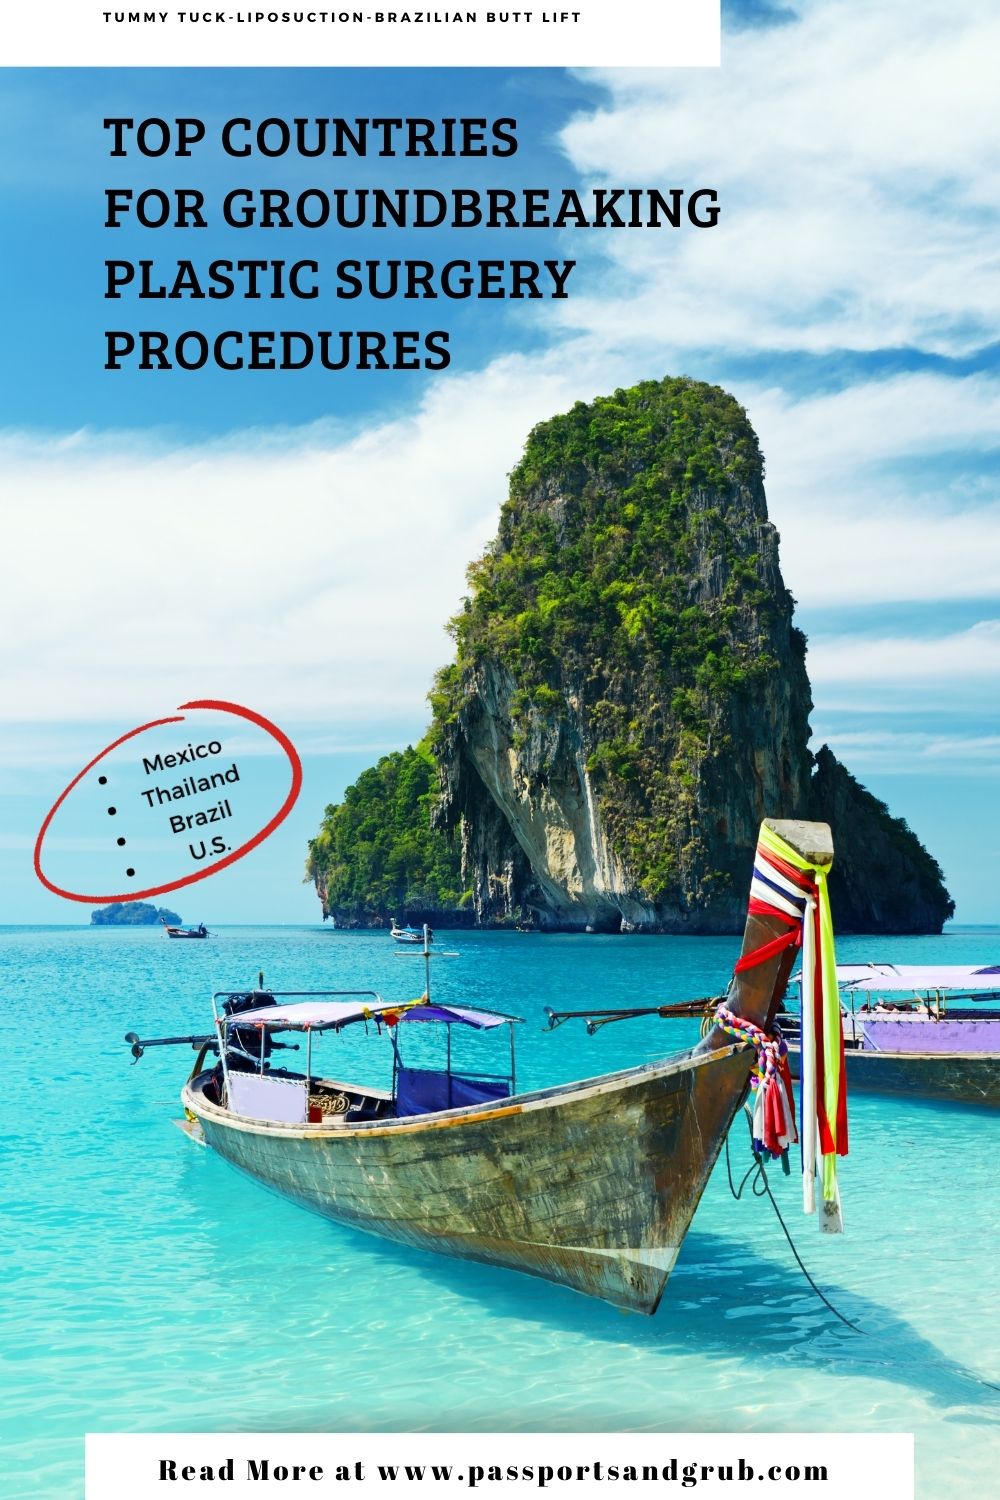 Where to go for plastic surgery